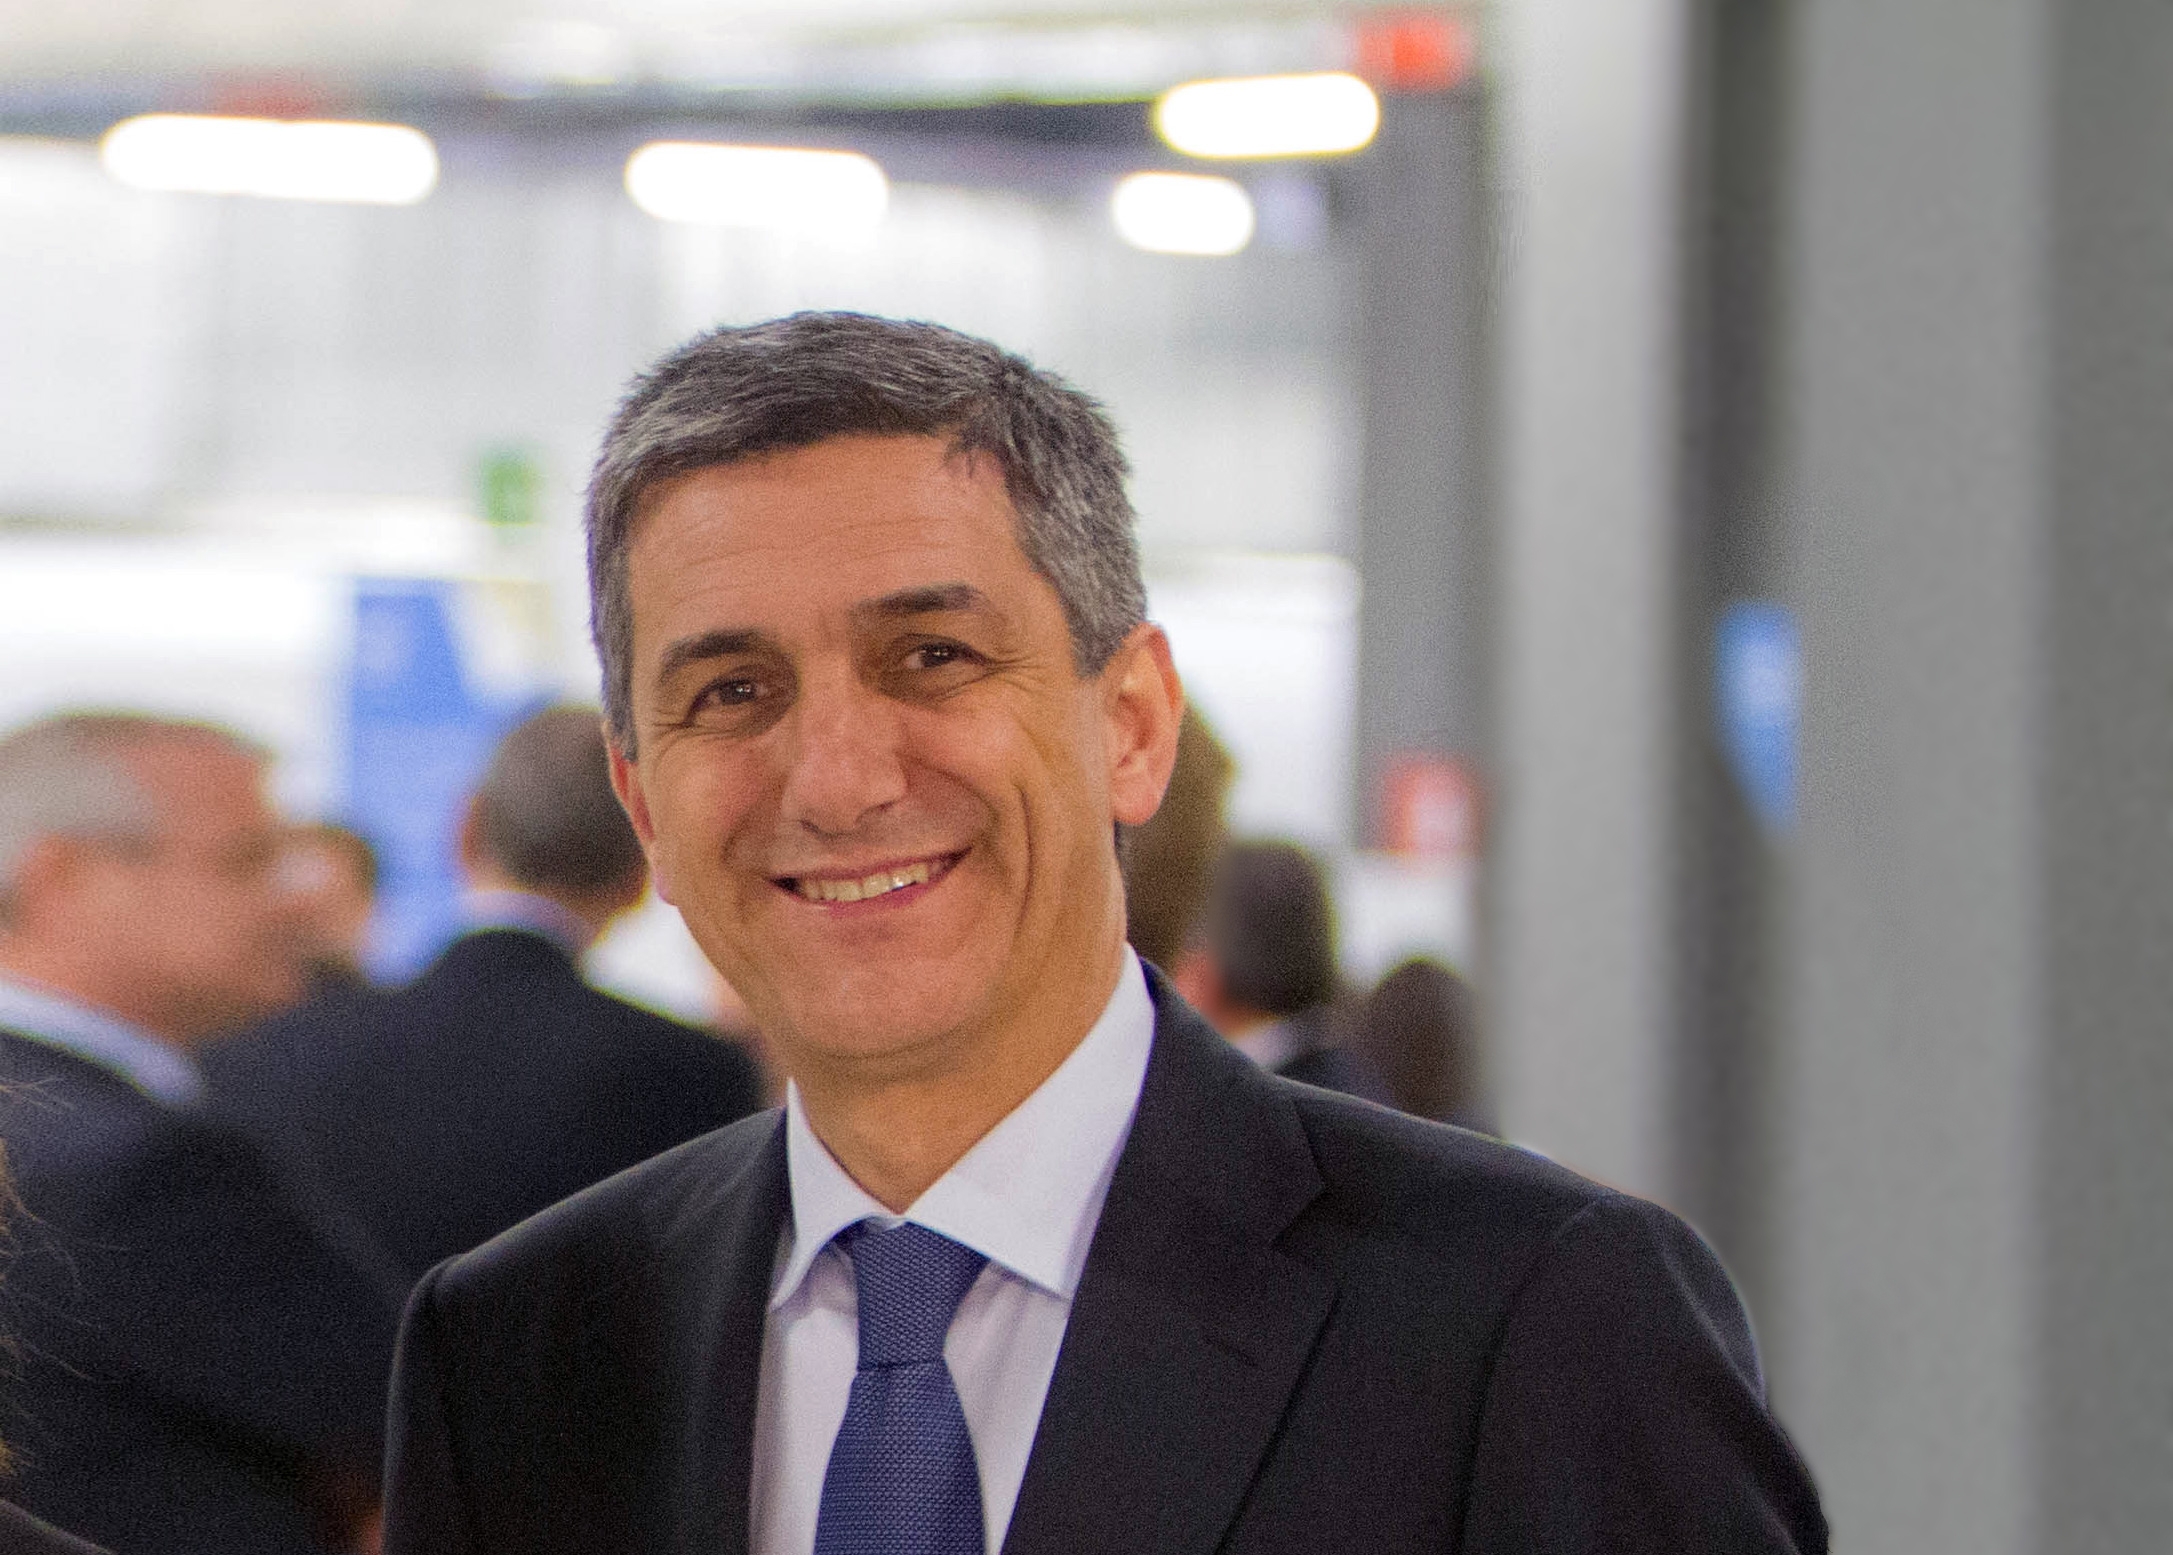 Stefano Venturi, CEO Group Hewlett-Packard in Italy and corporate vice president of Hewlett-Packard Inc.